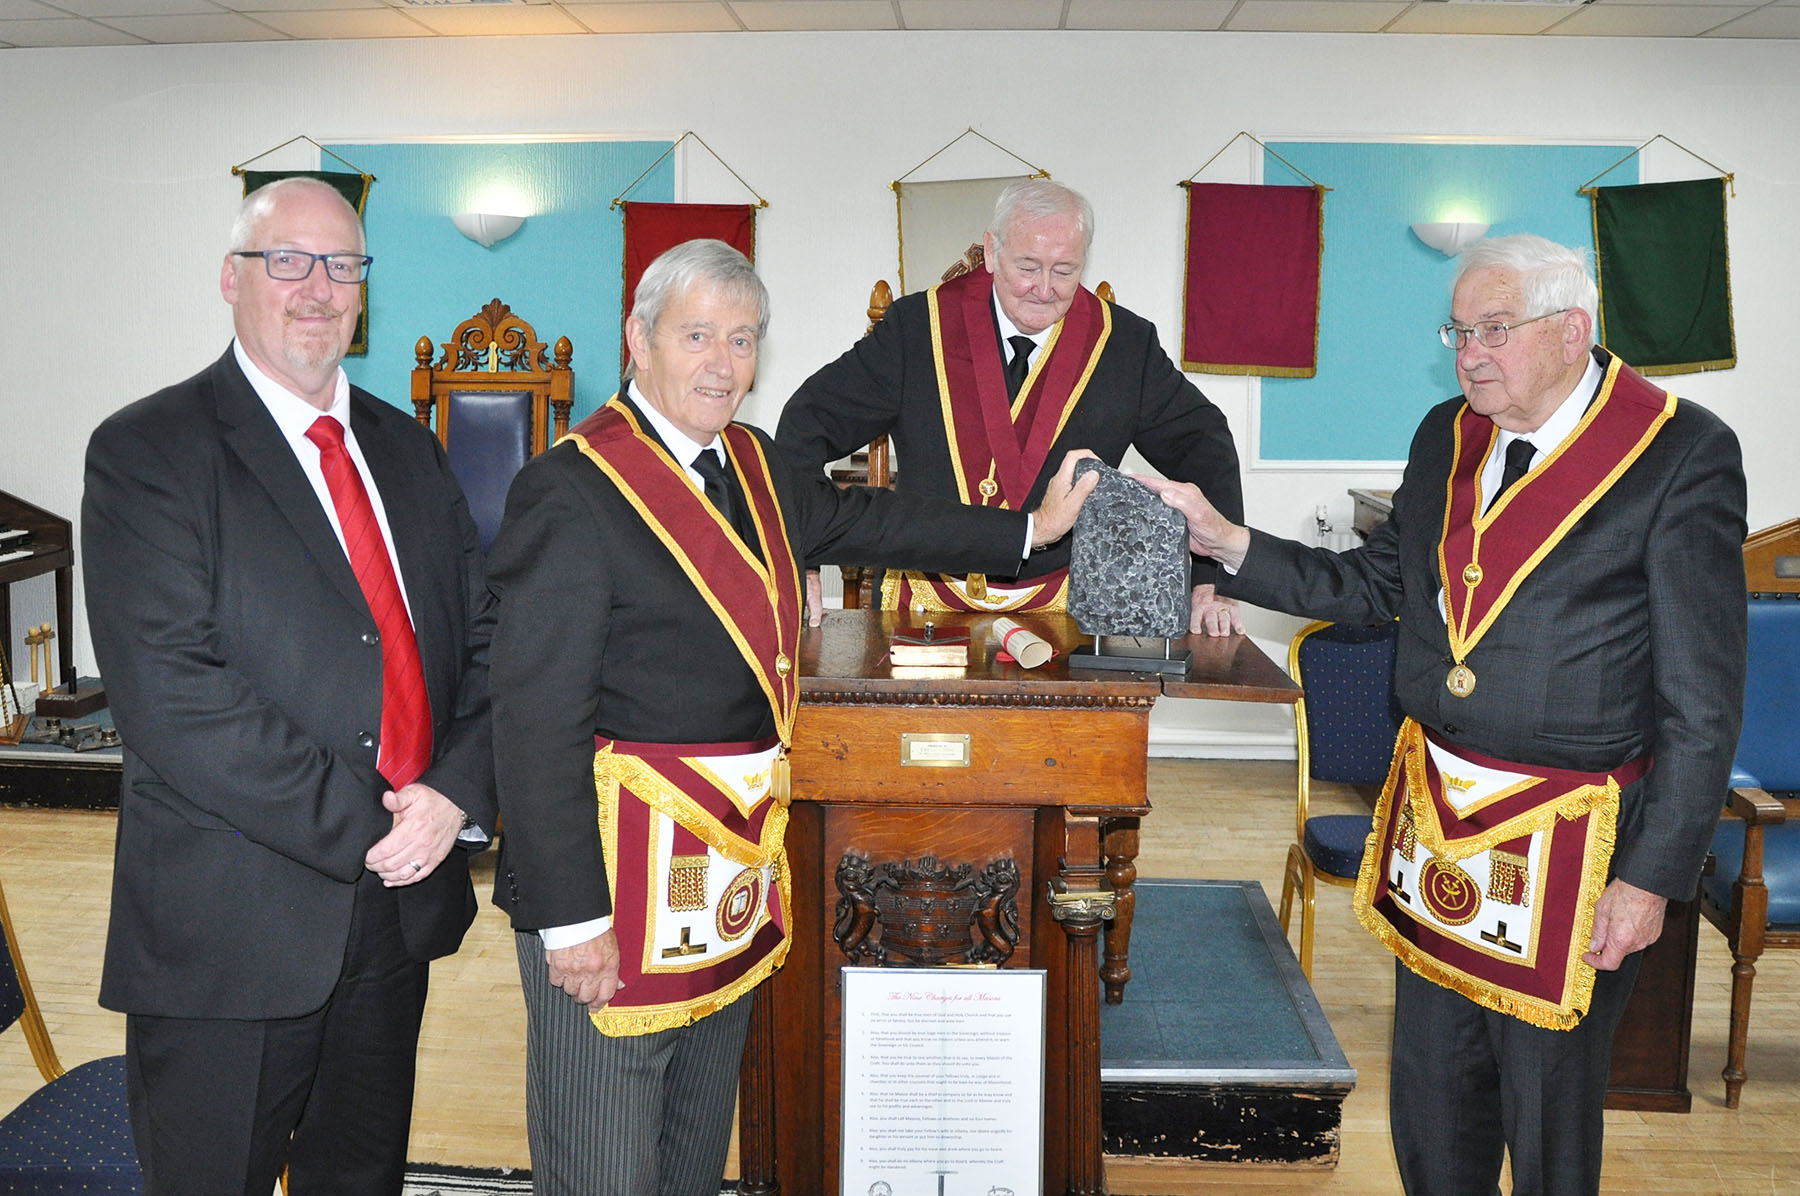 A further advancement in Masonic knowledge at the Sword of Constantine Court